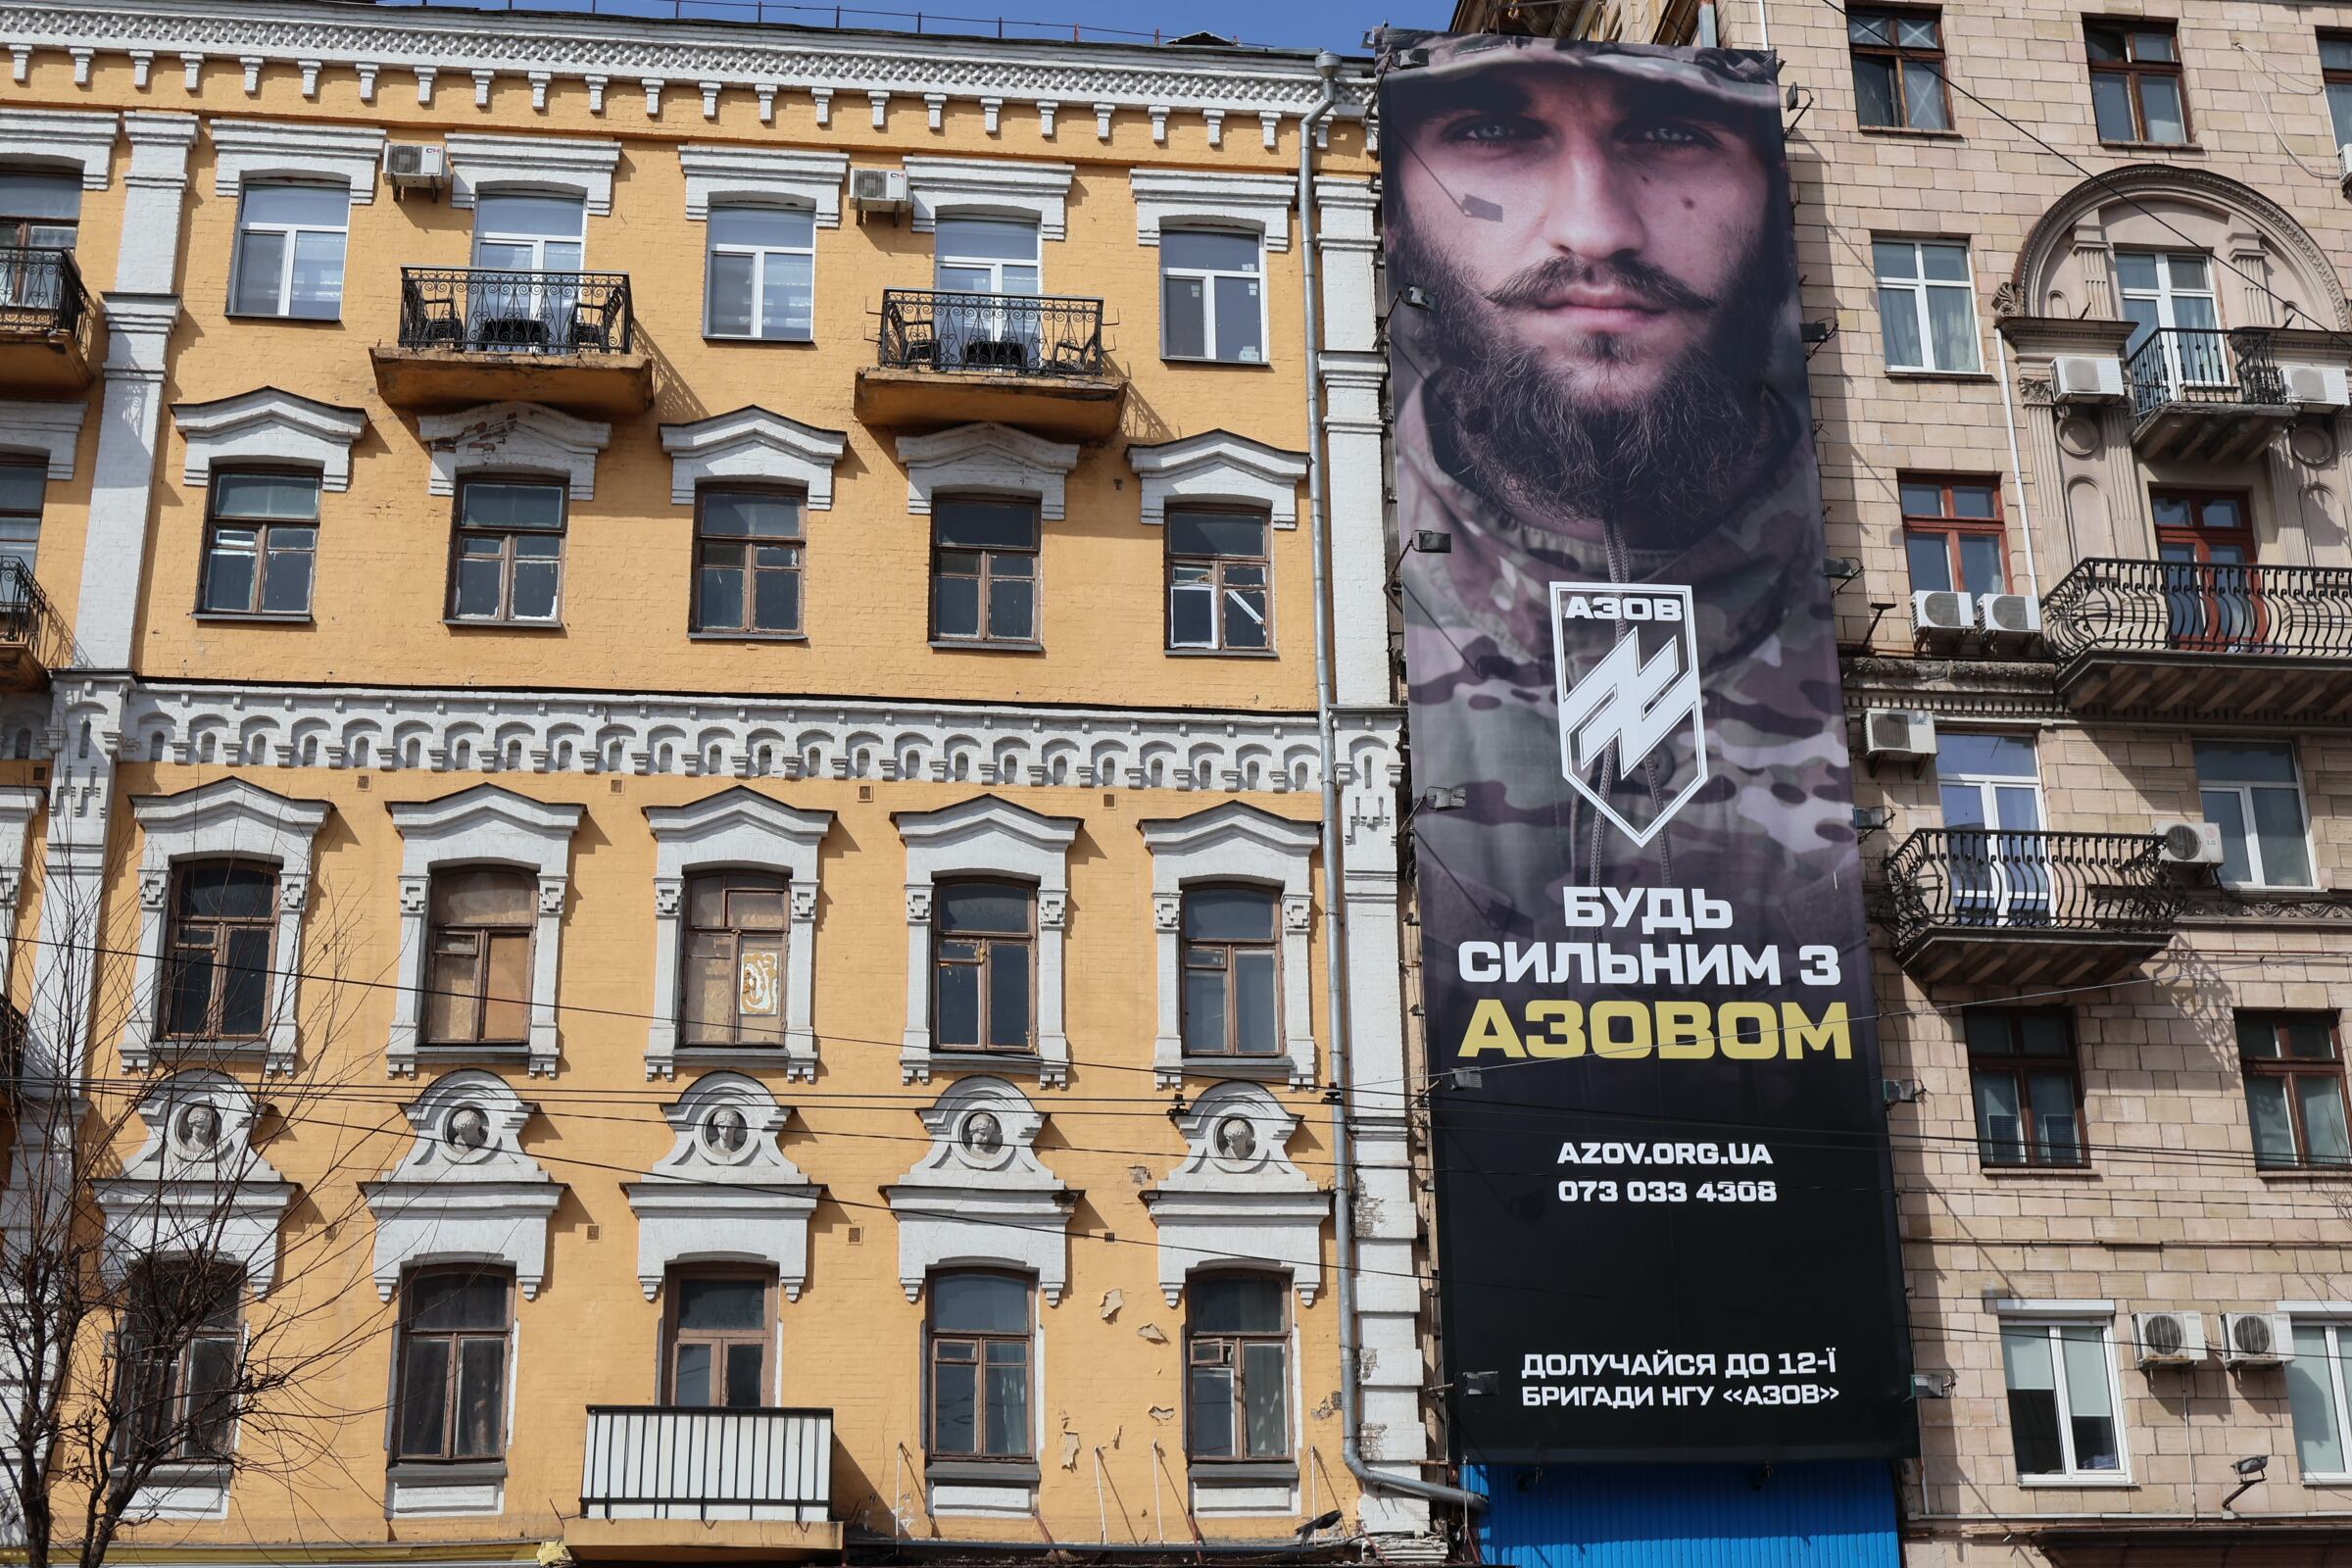 Azov Brigade recruitment advertising poster on March 26 in Kyiv.